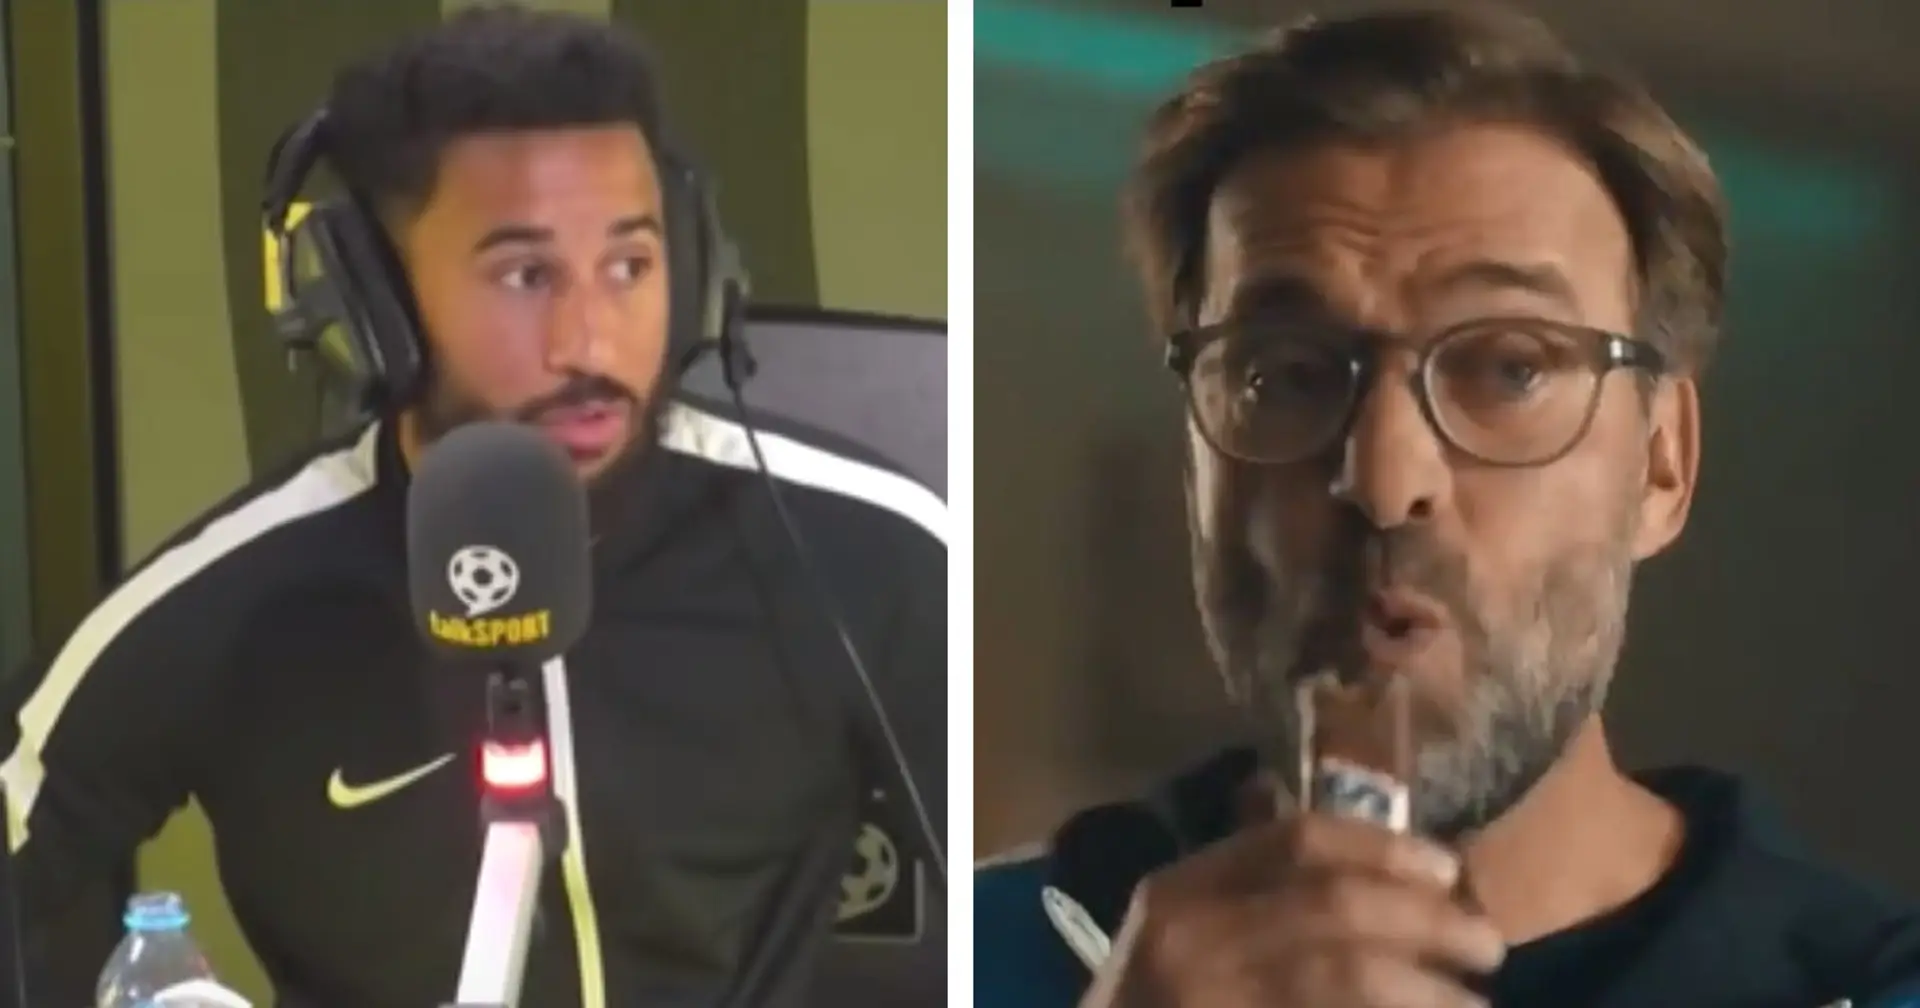 'I love how Jurgen Klopp has found a way to get his way, he’s been moaning for years': Townsend slams Klopp